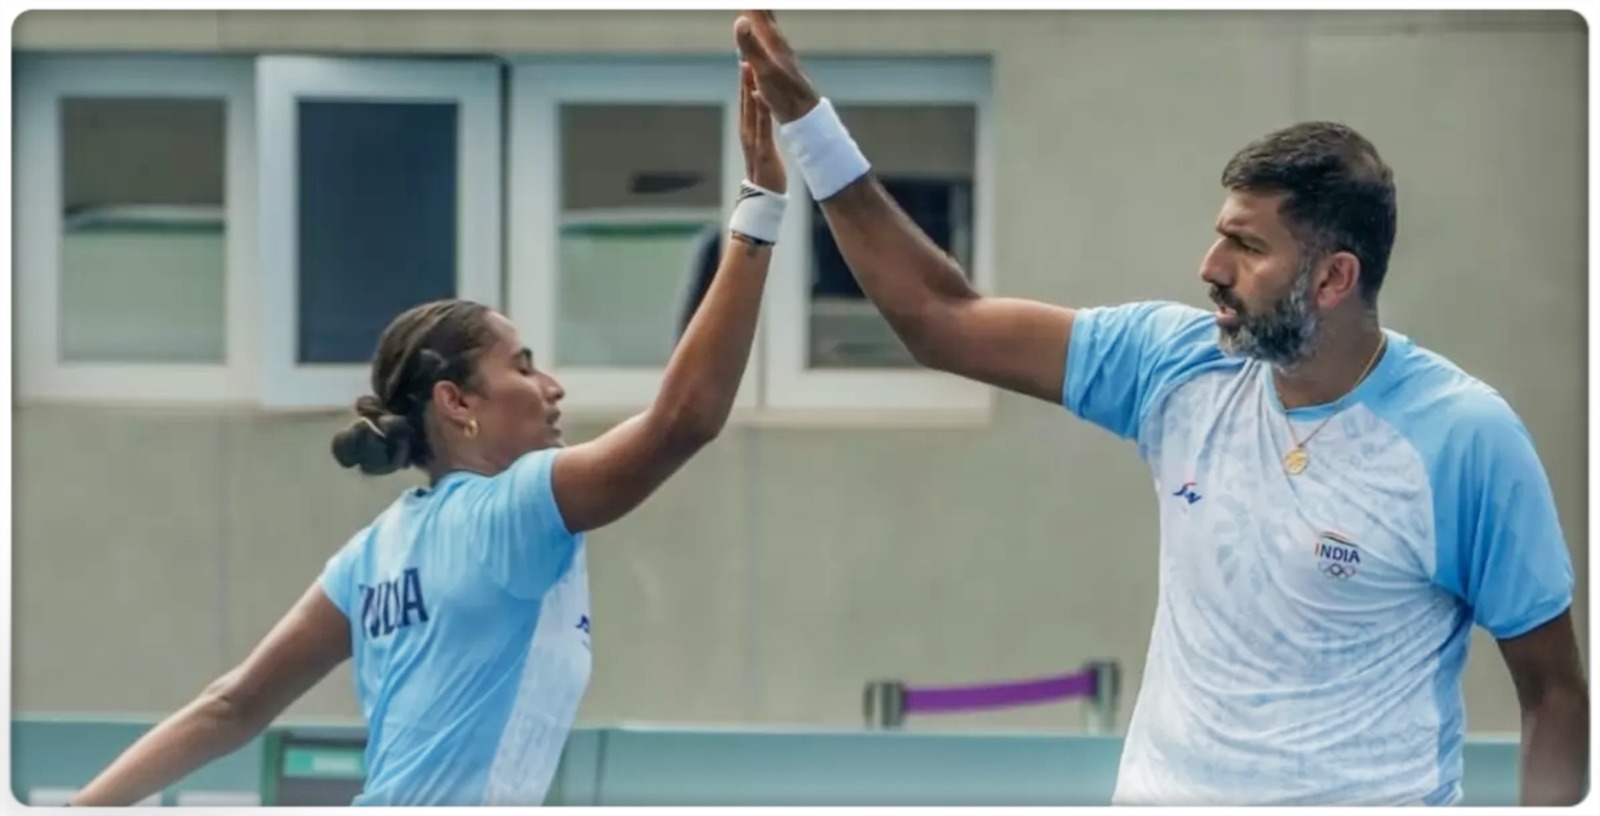 India Wins Gold in Tennis Mixed Doubles at Asian Games